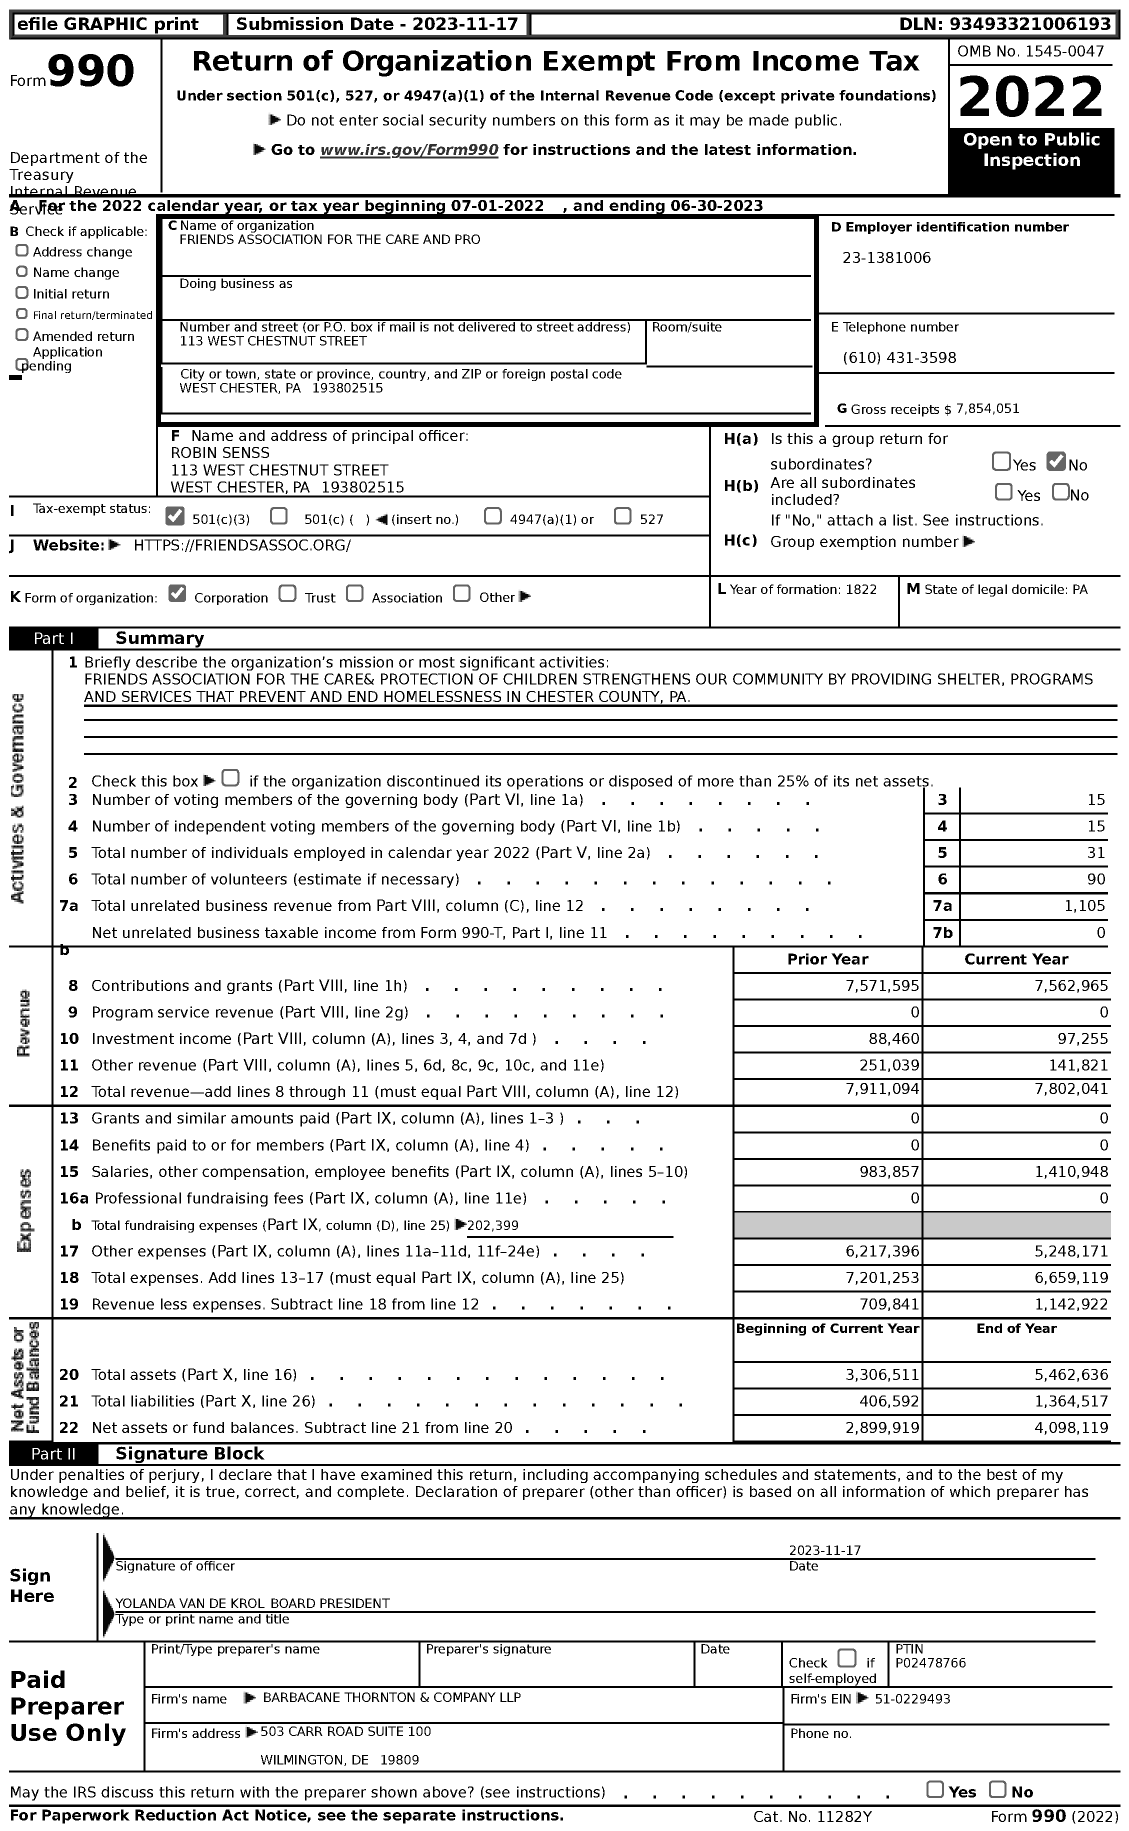 Image of first page of 2022 Form 990 for Friends Association for the Care and Pro